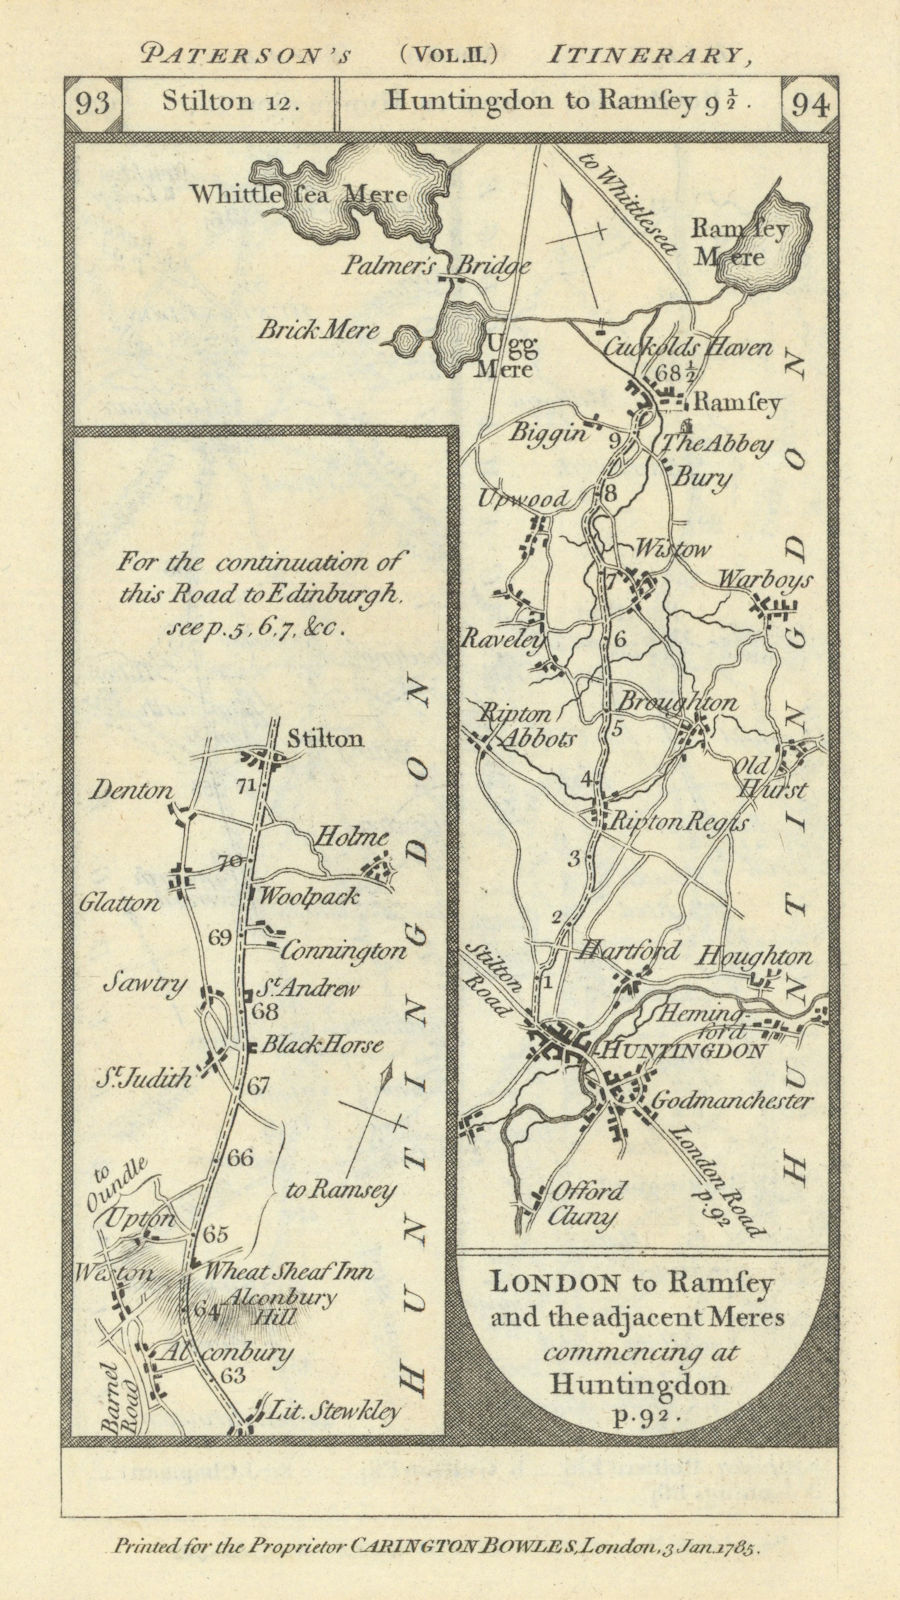 Associate Product Stilton. Huntingdon - Ramsey - Whittelsey Mere road strip map PATERSON 1785